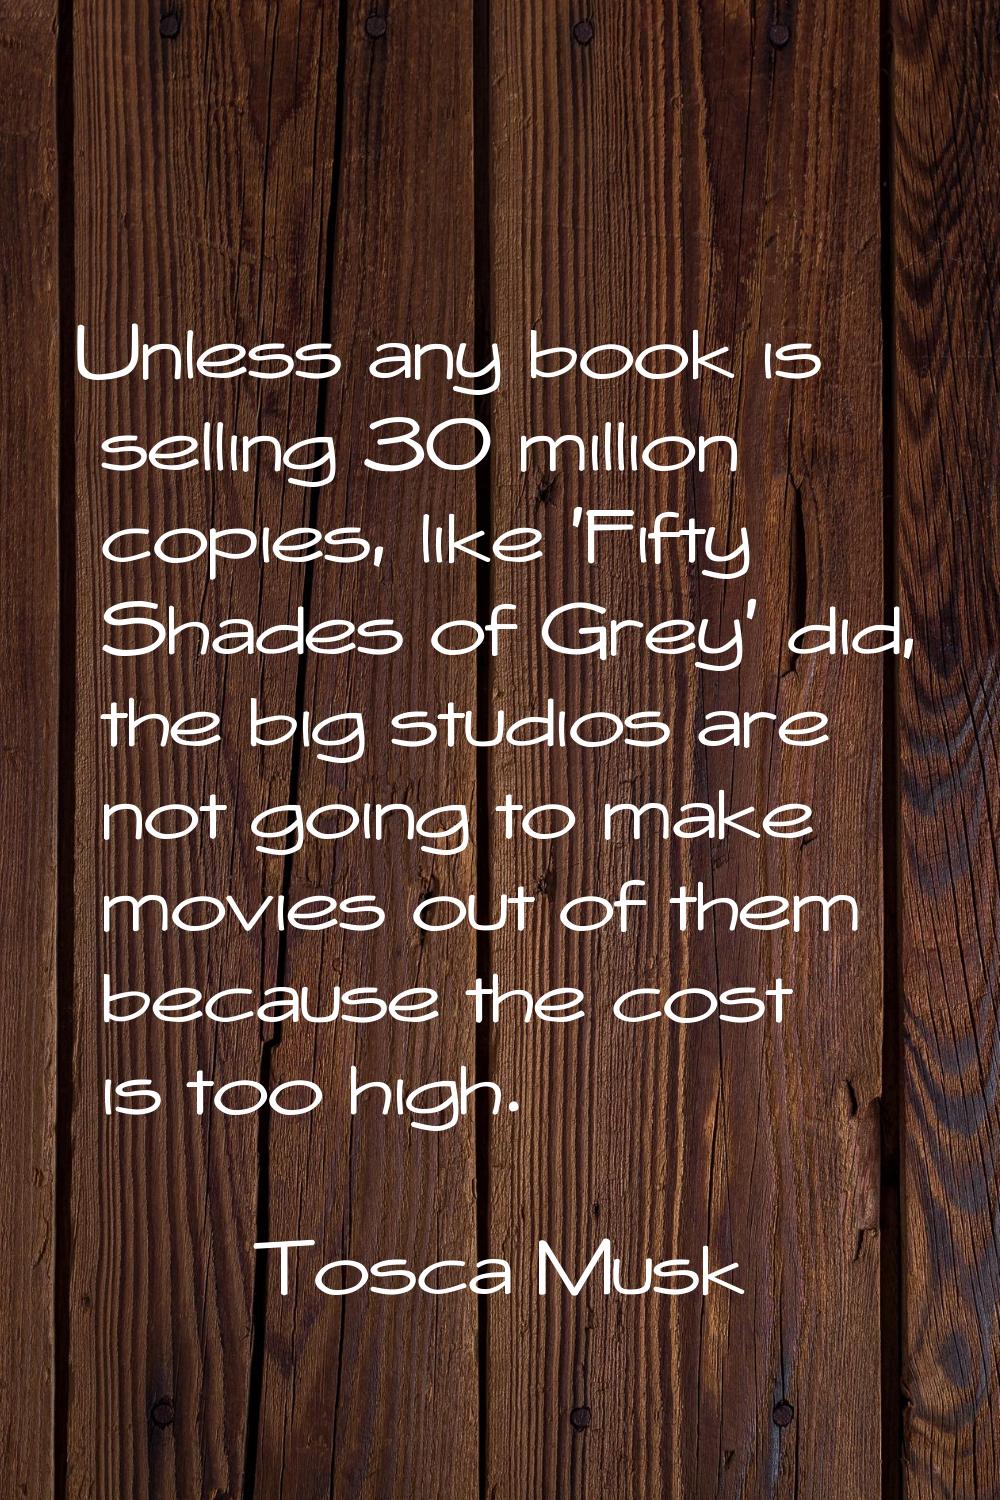 Unless any book is selling 30 million copies, like 'Fifty Shades of Grey' did, the big studios are 